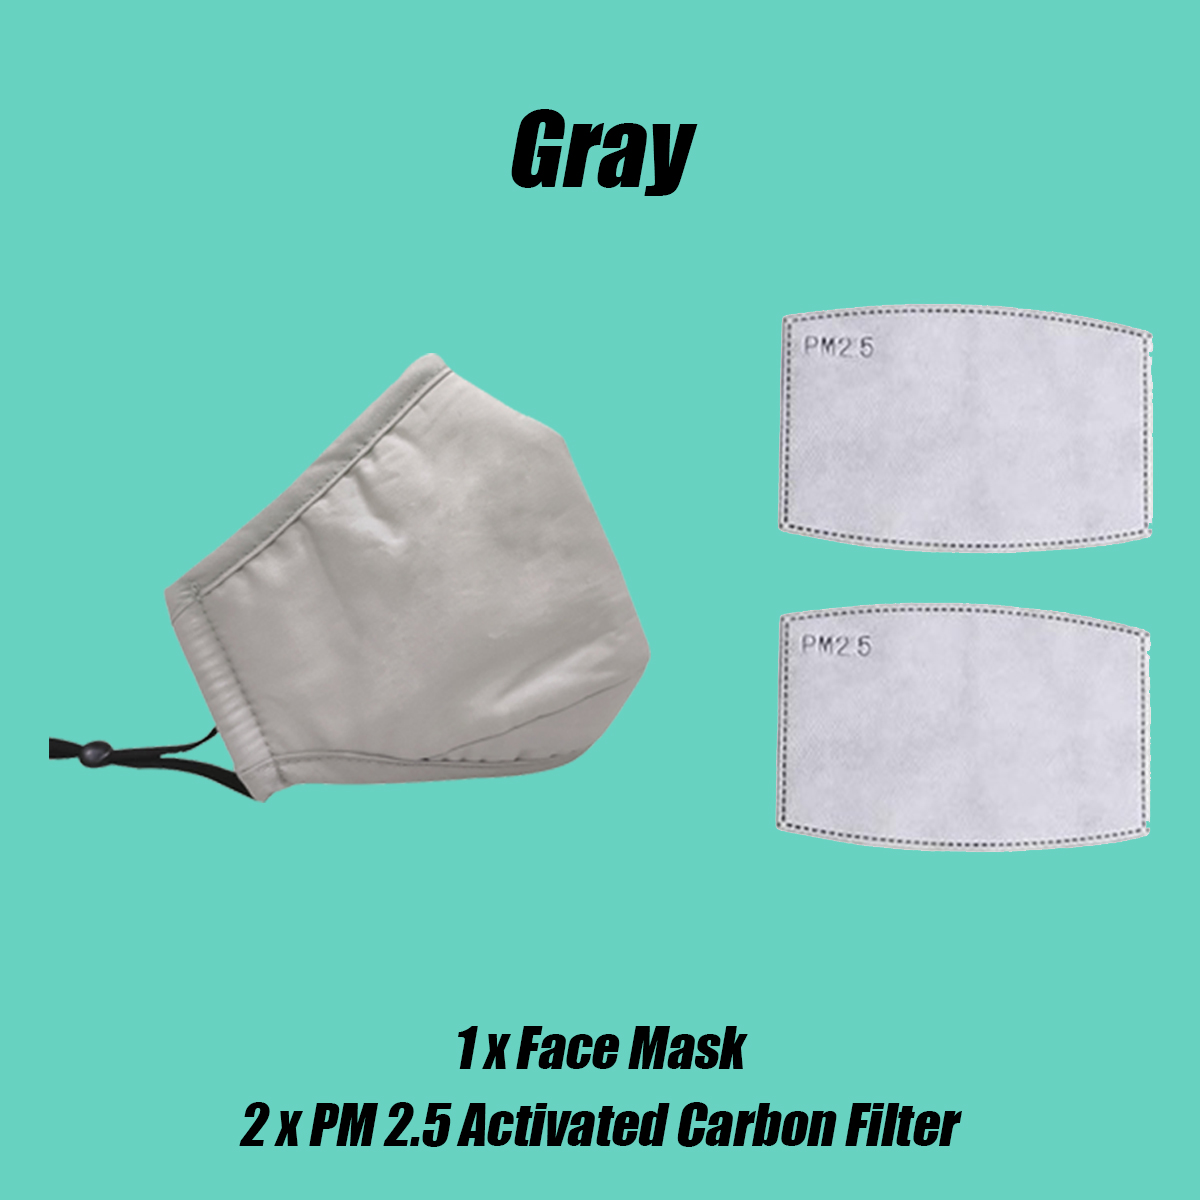 Cotton-Anti-Dust-Face-Mask-Cover-Reusable-PM25-Respirator-with-Filters-Ear-Loop-1662325-8